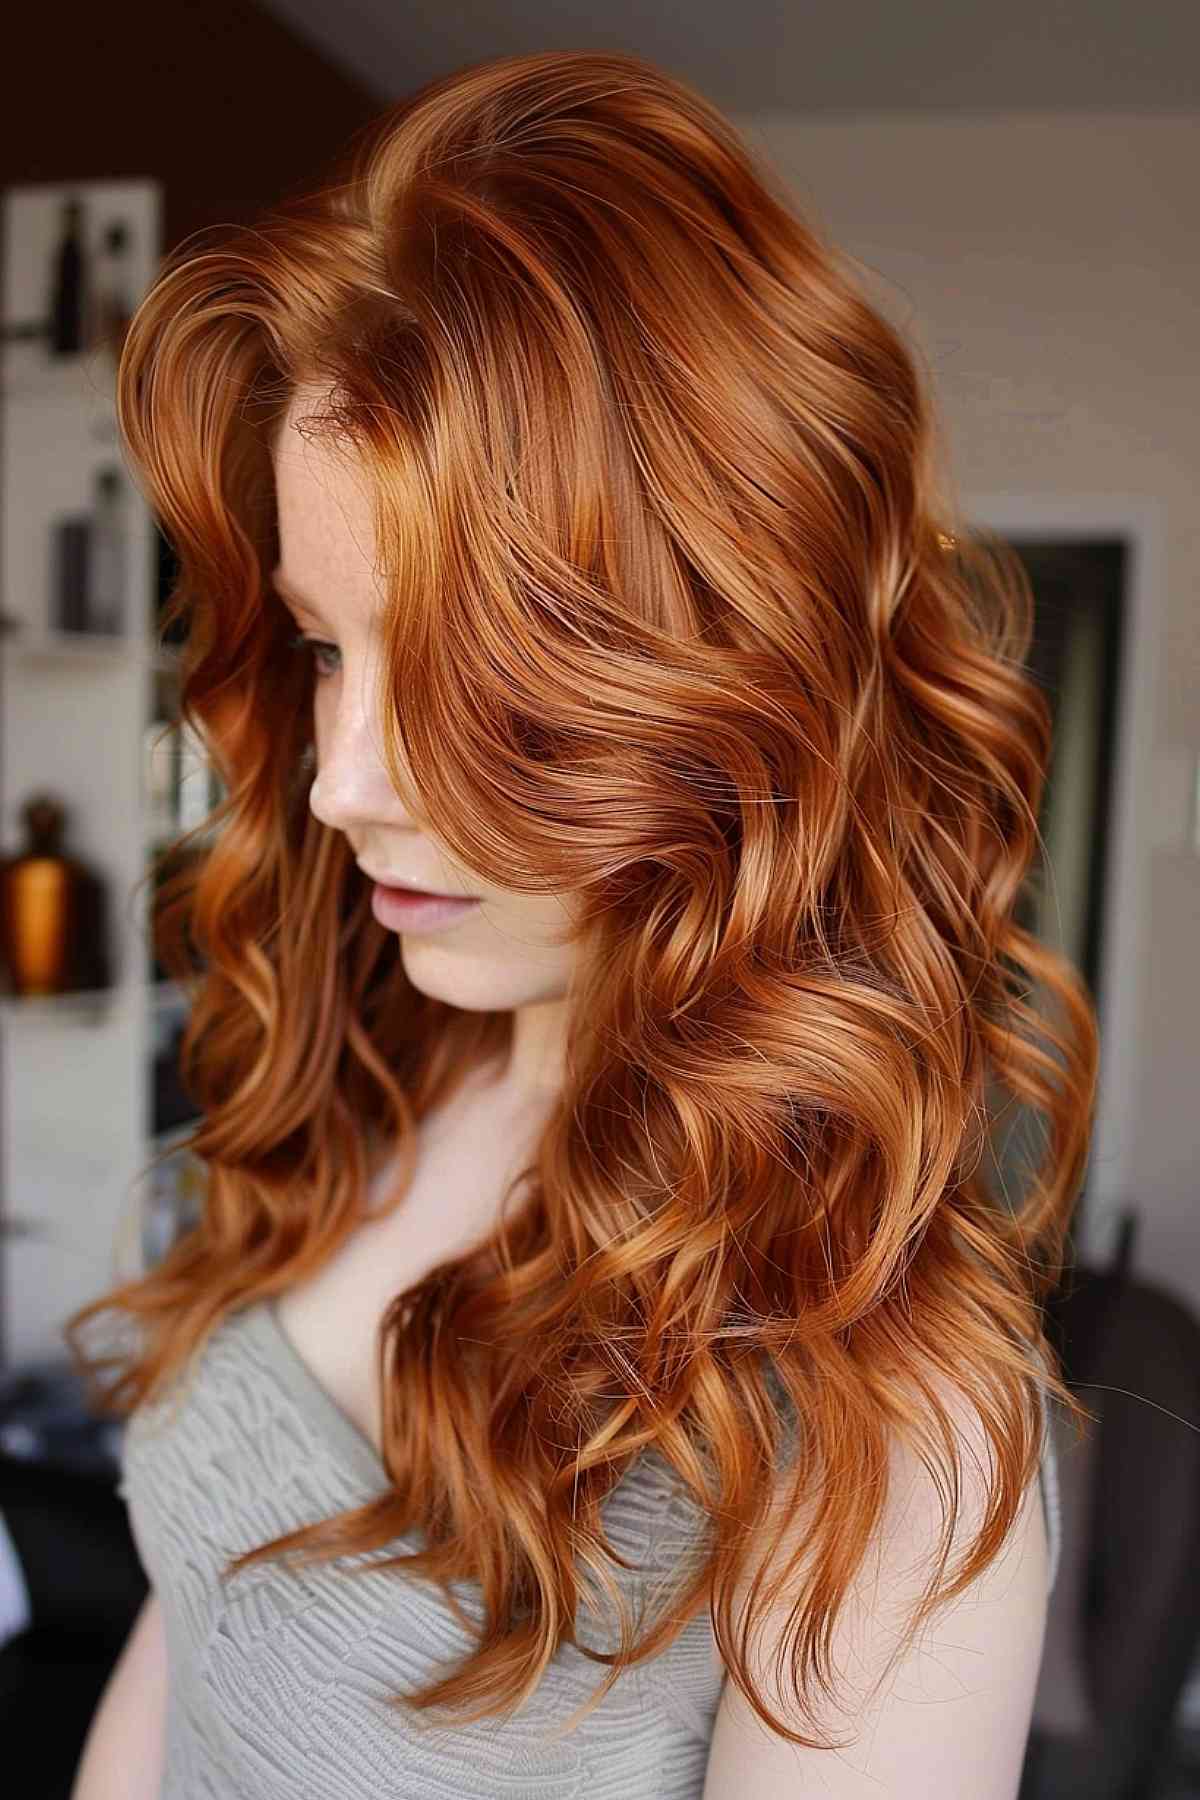 Long, wavy hair in a vivid ginger copper color